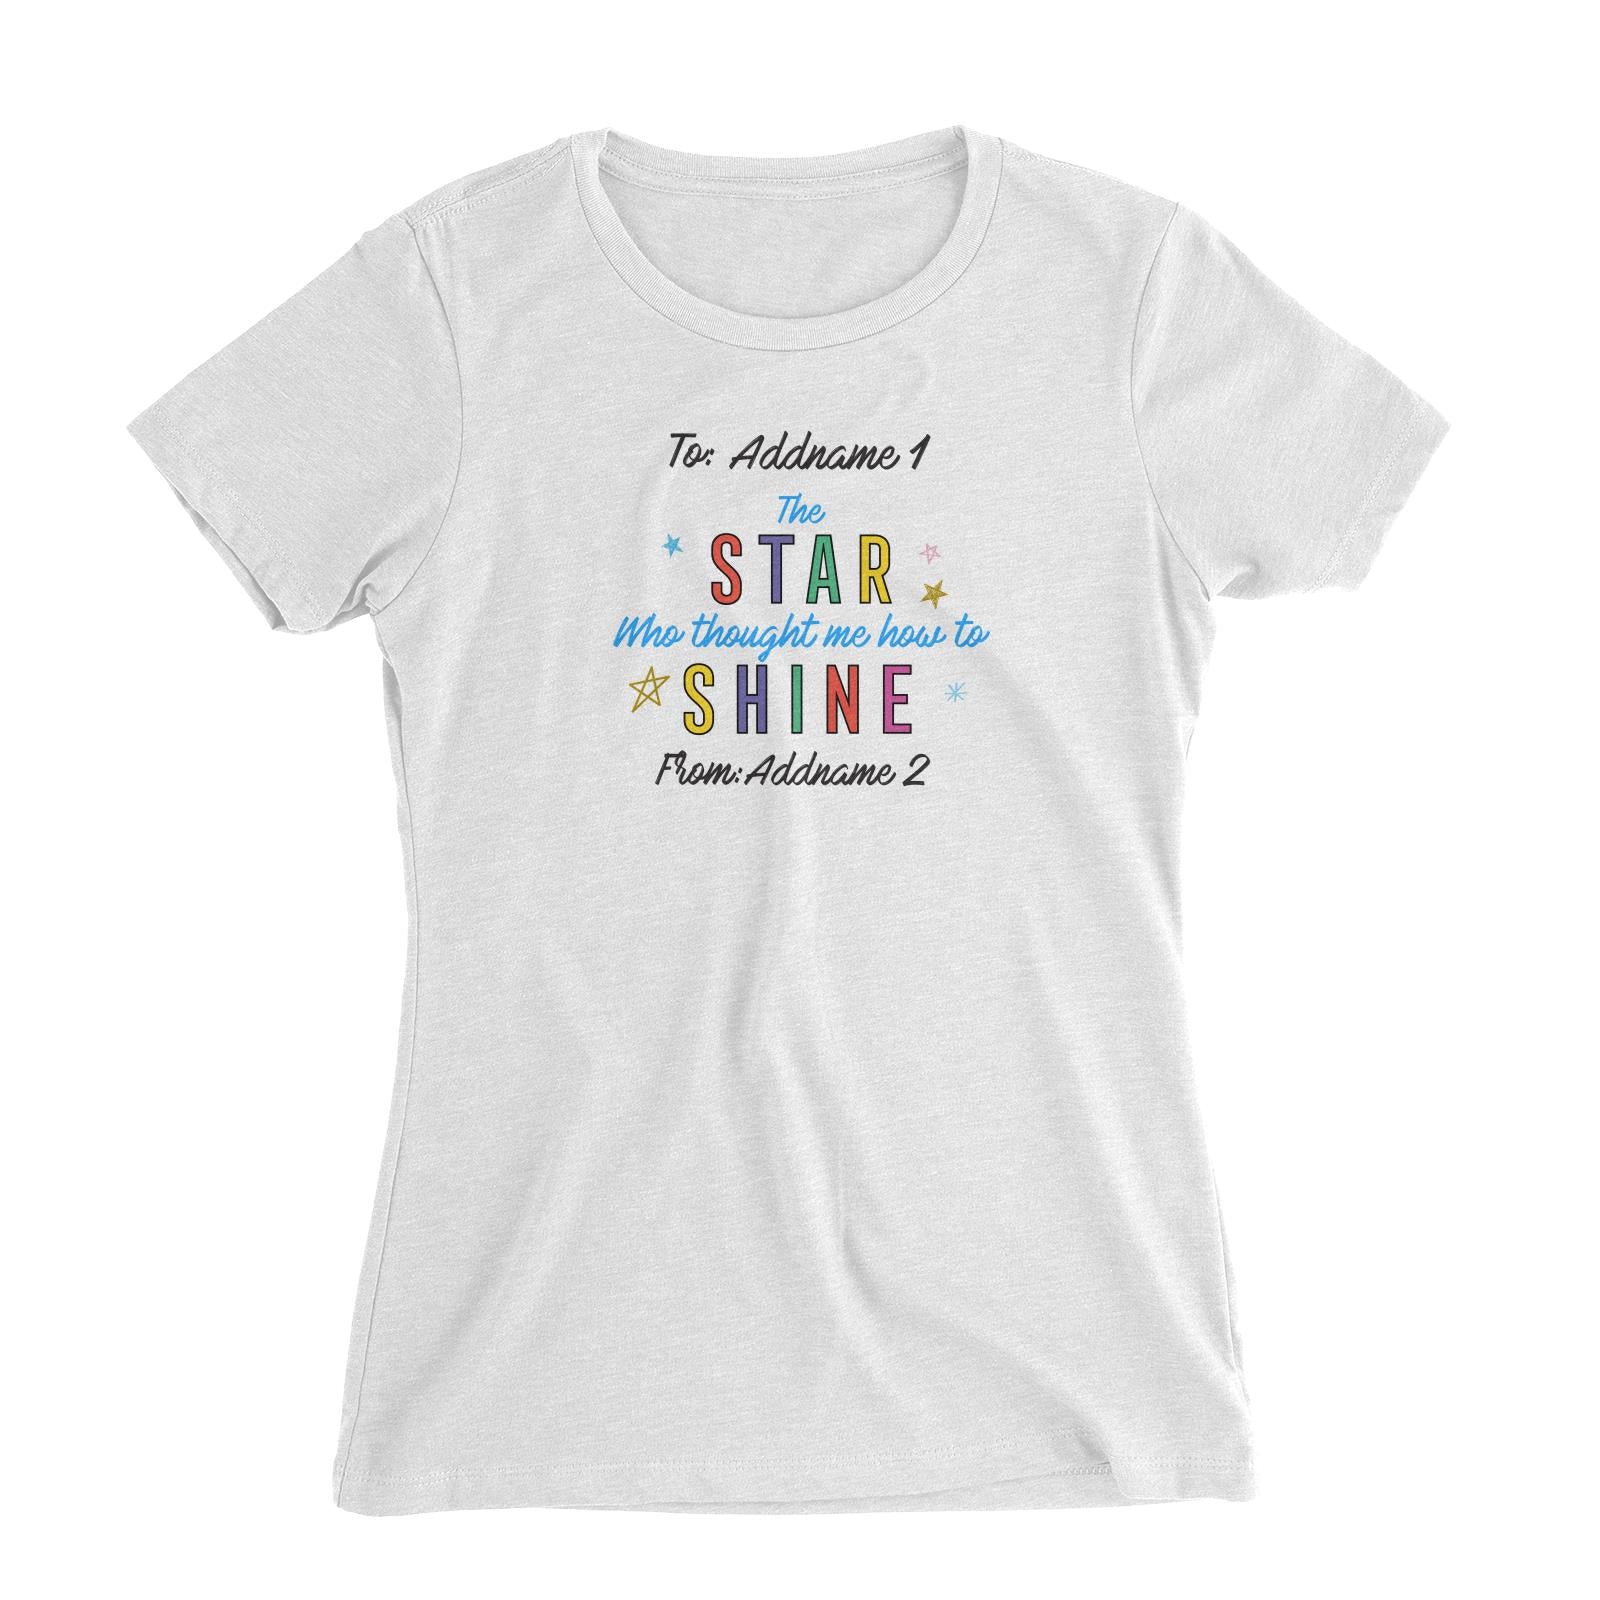 Doodle Series - The Star Who Taught Me How To Shine Women's Slim Fit T-Shirt